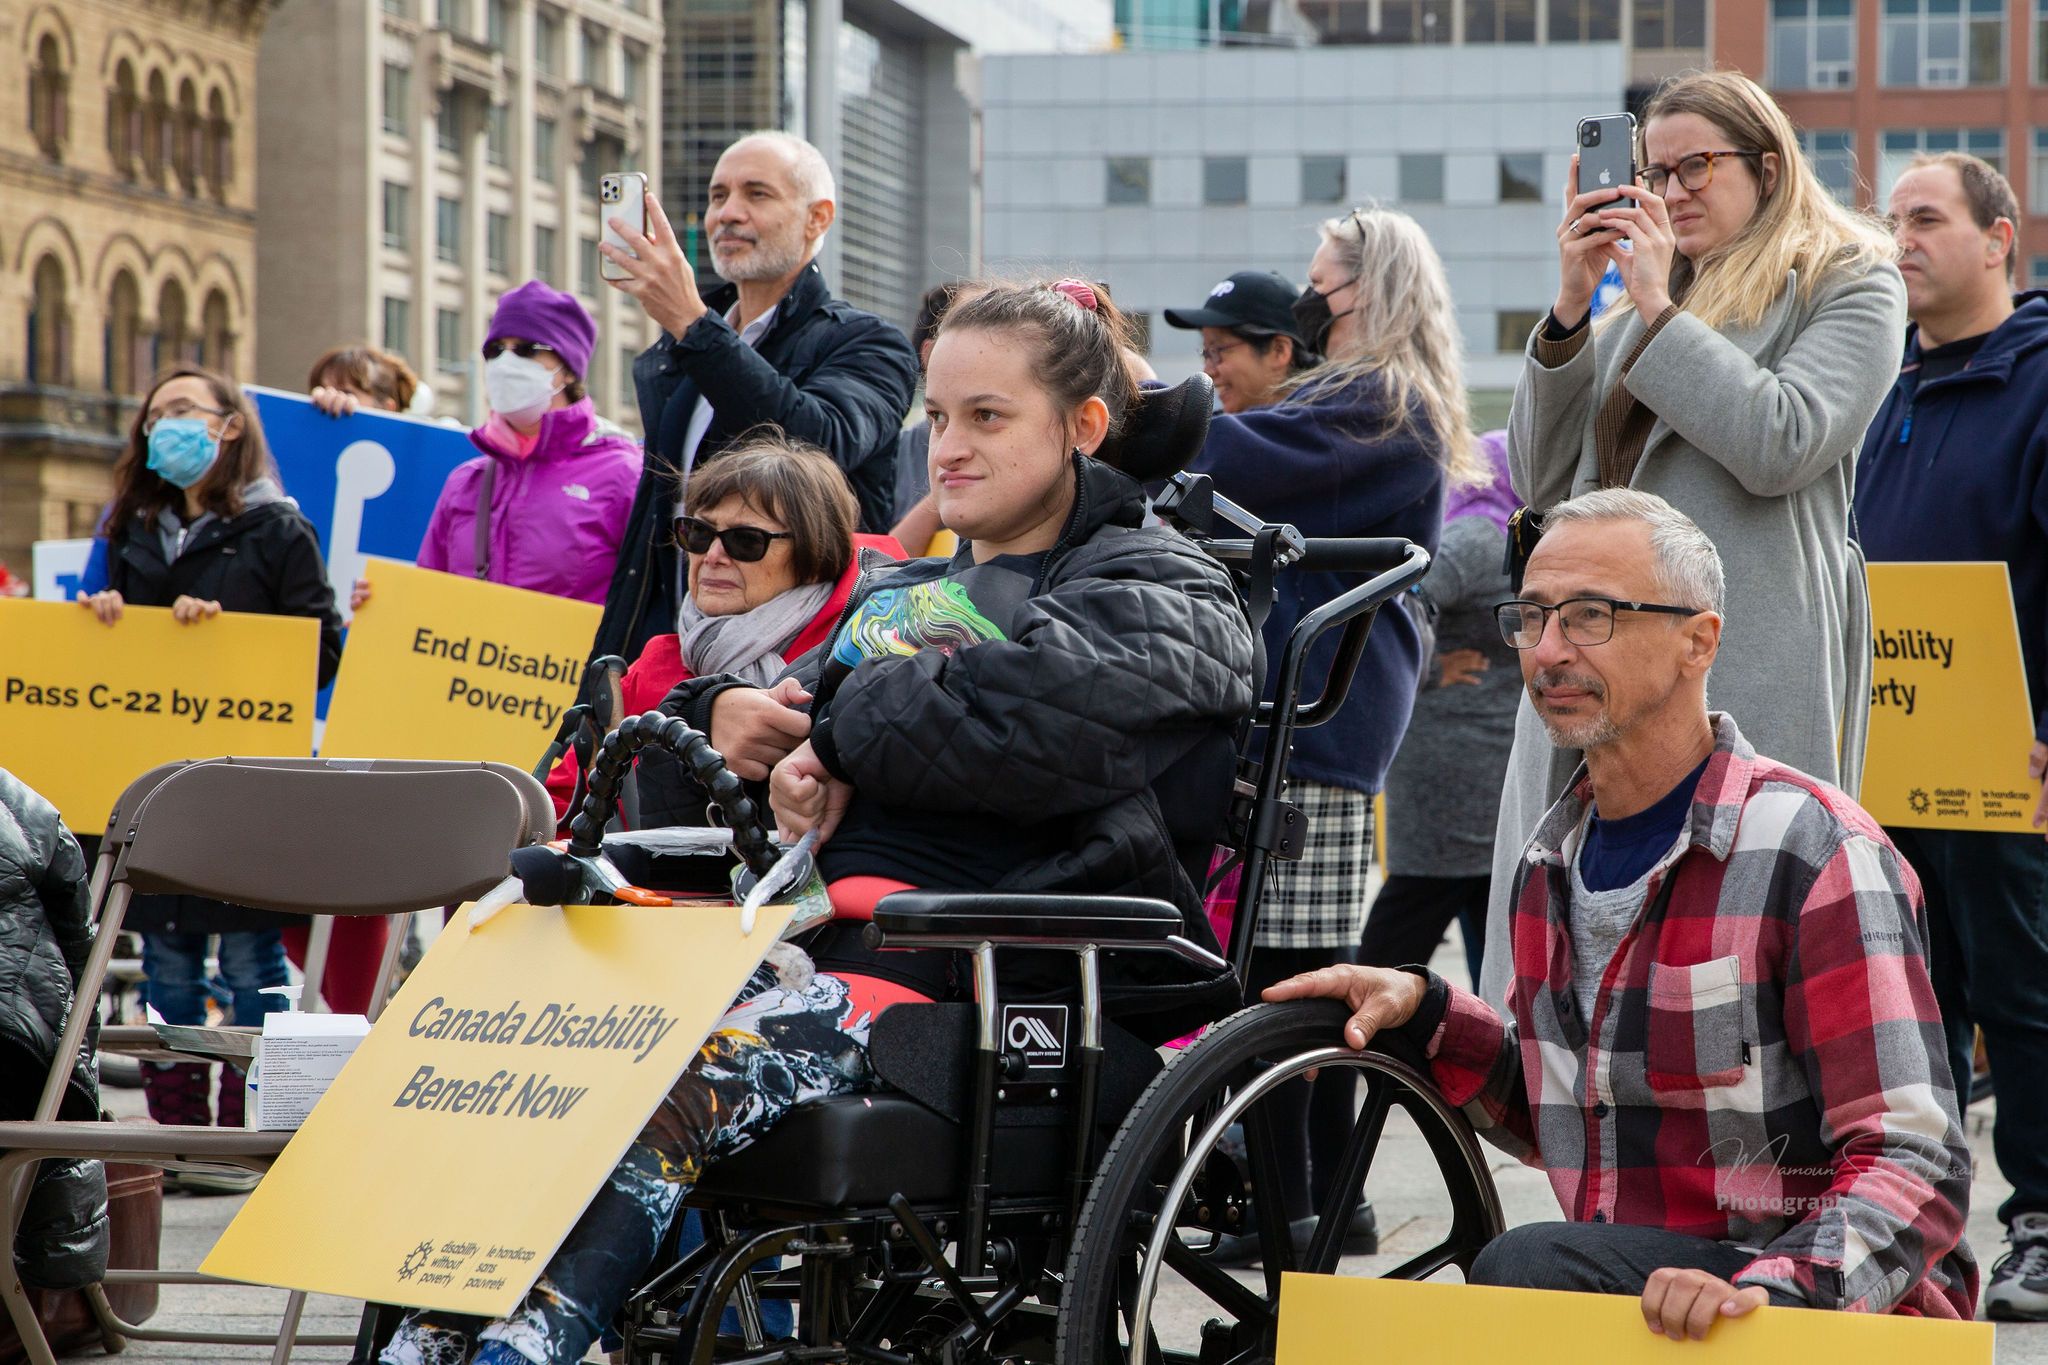 A woman in a wheelchair and other peoples of mixed abilities hold protest signs saying Canada Disability Benefit Now outside Parliament